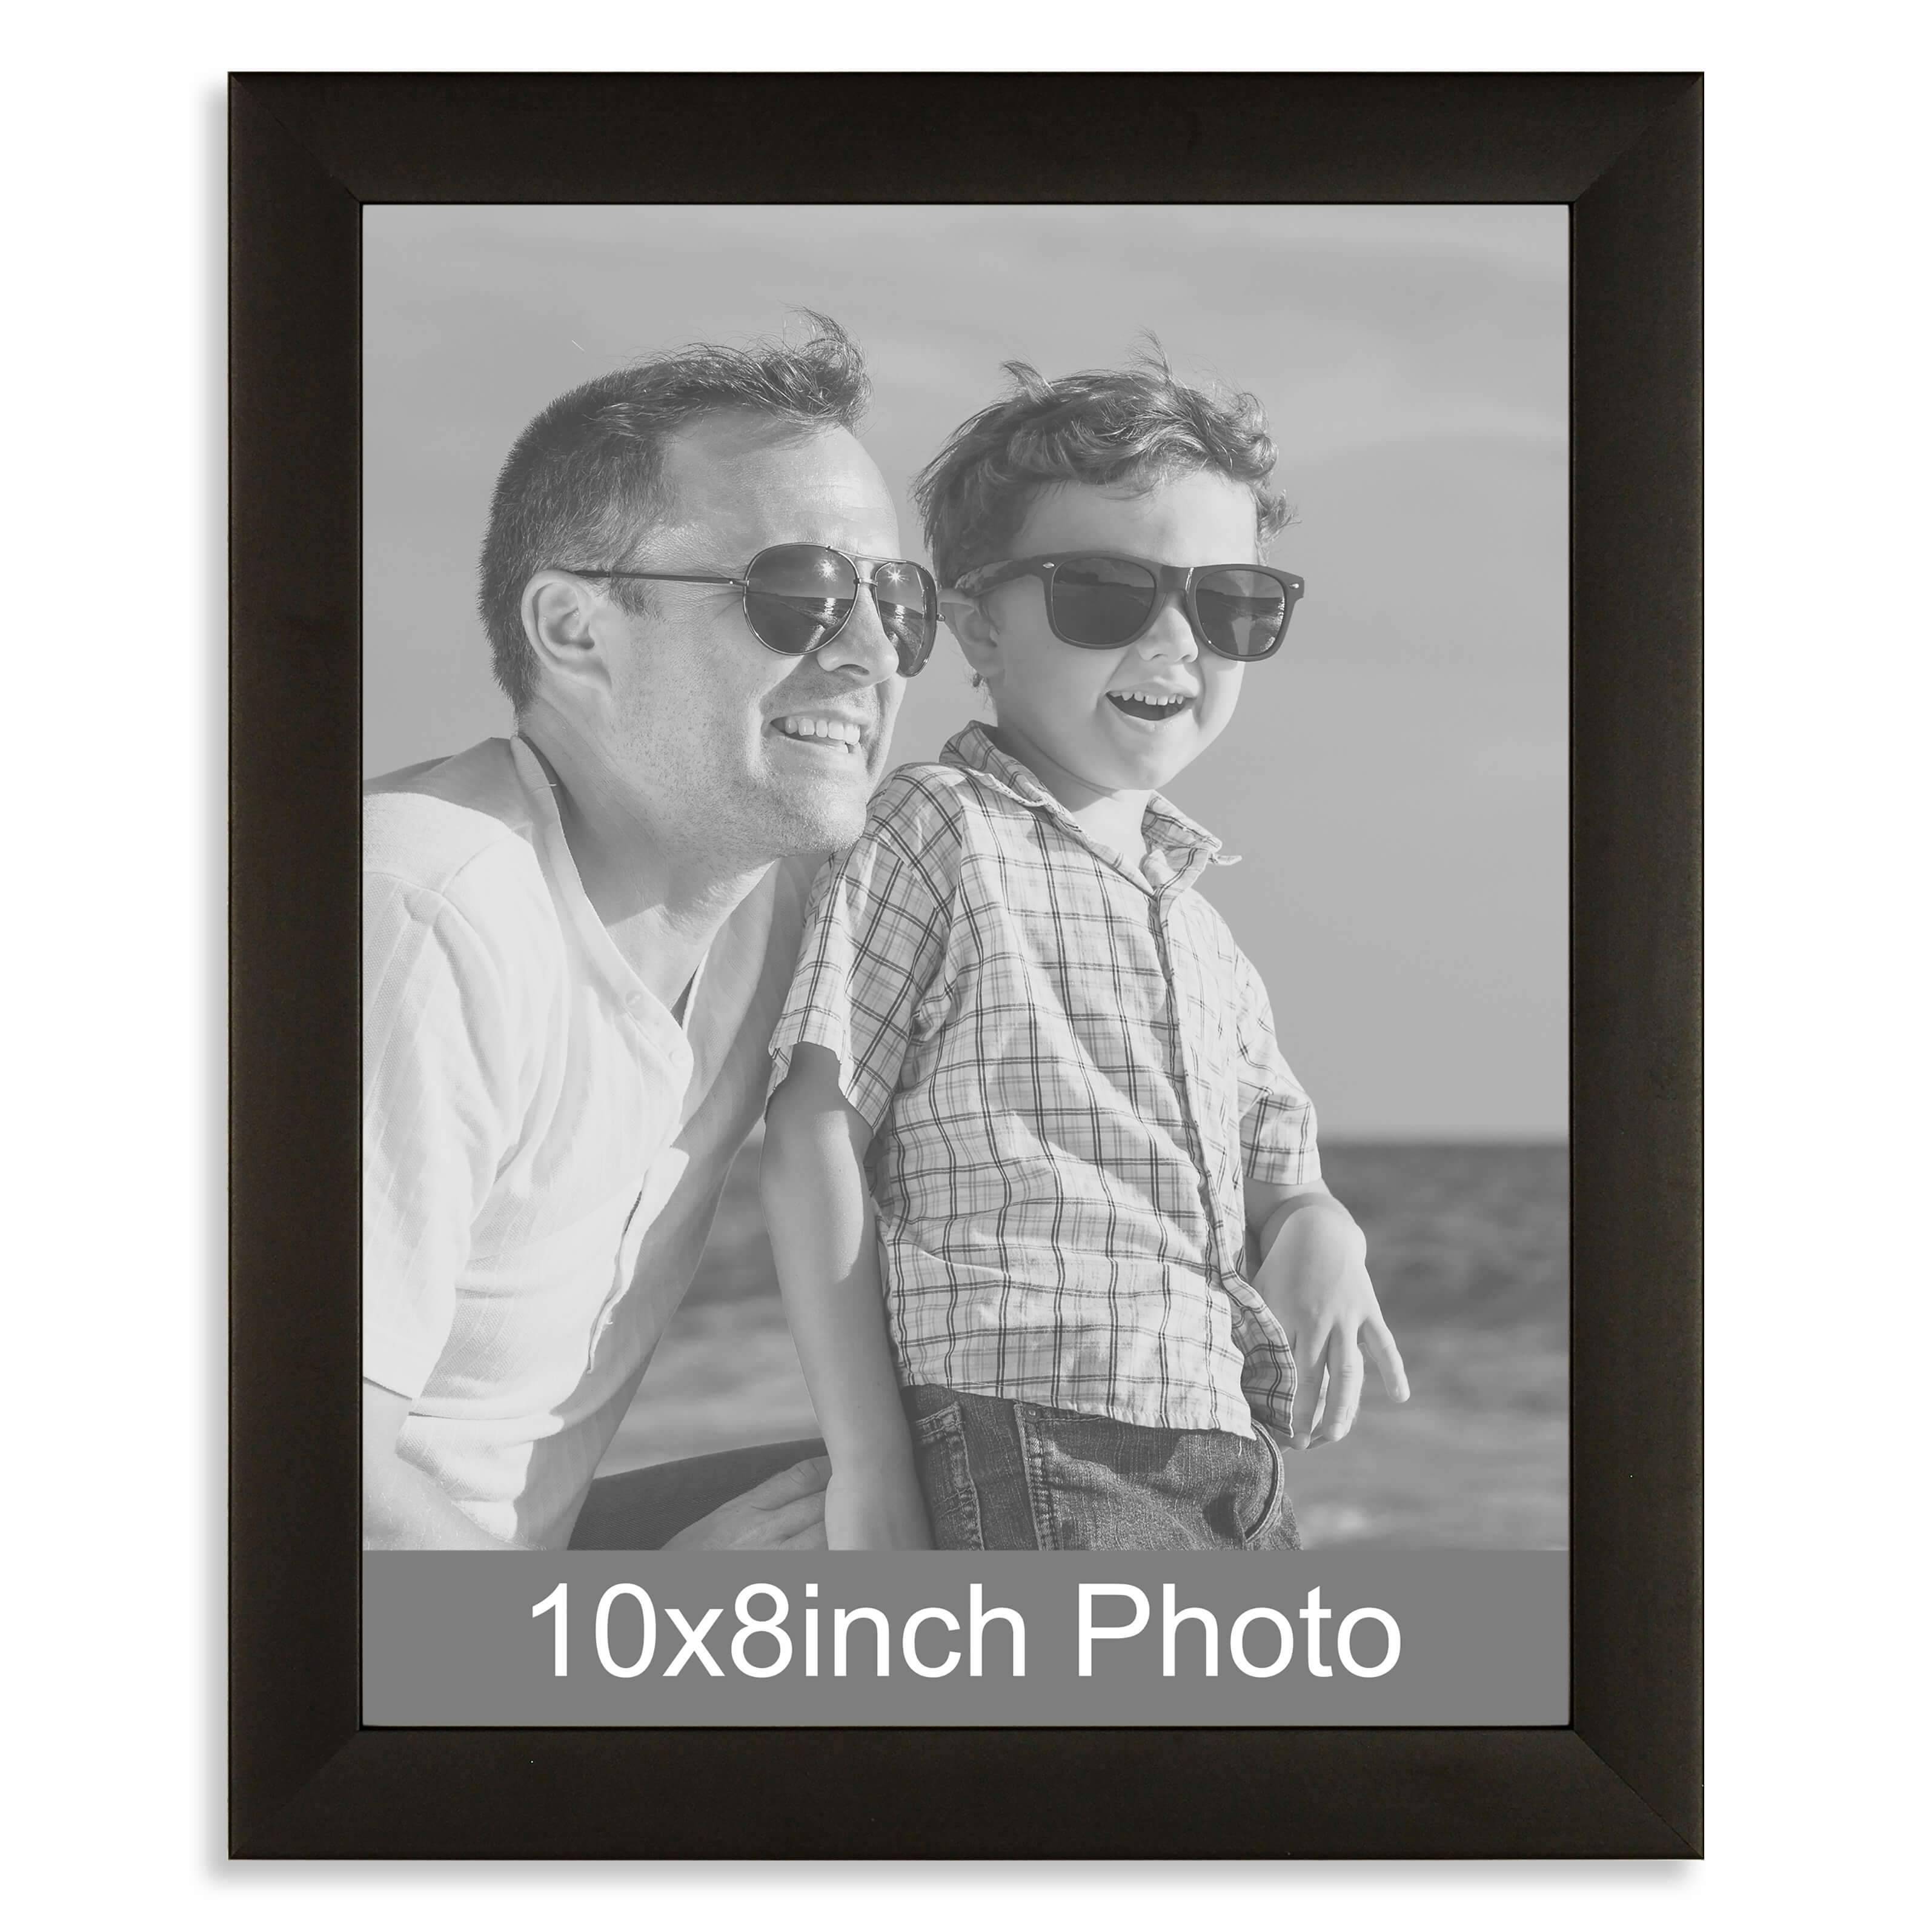 10 x 8inch Black Wooden Photo Frame for a 10×8/8x10in image